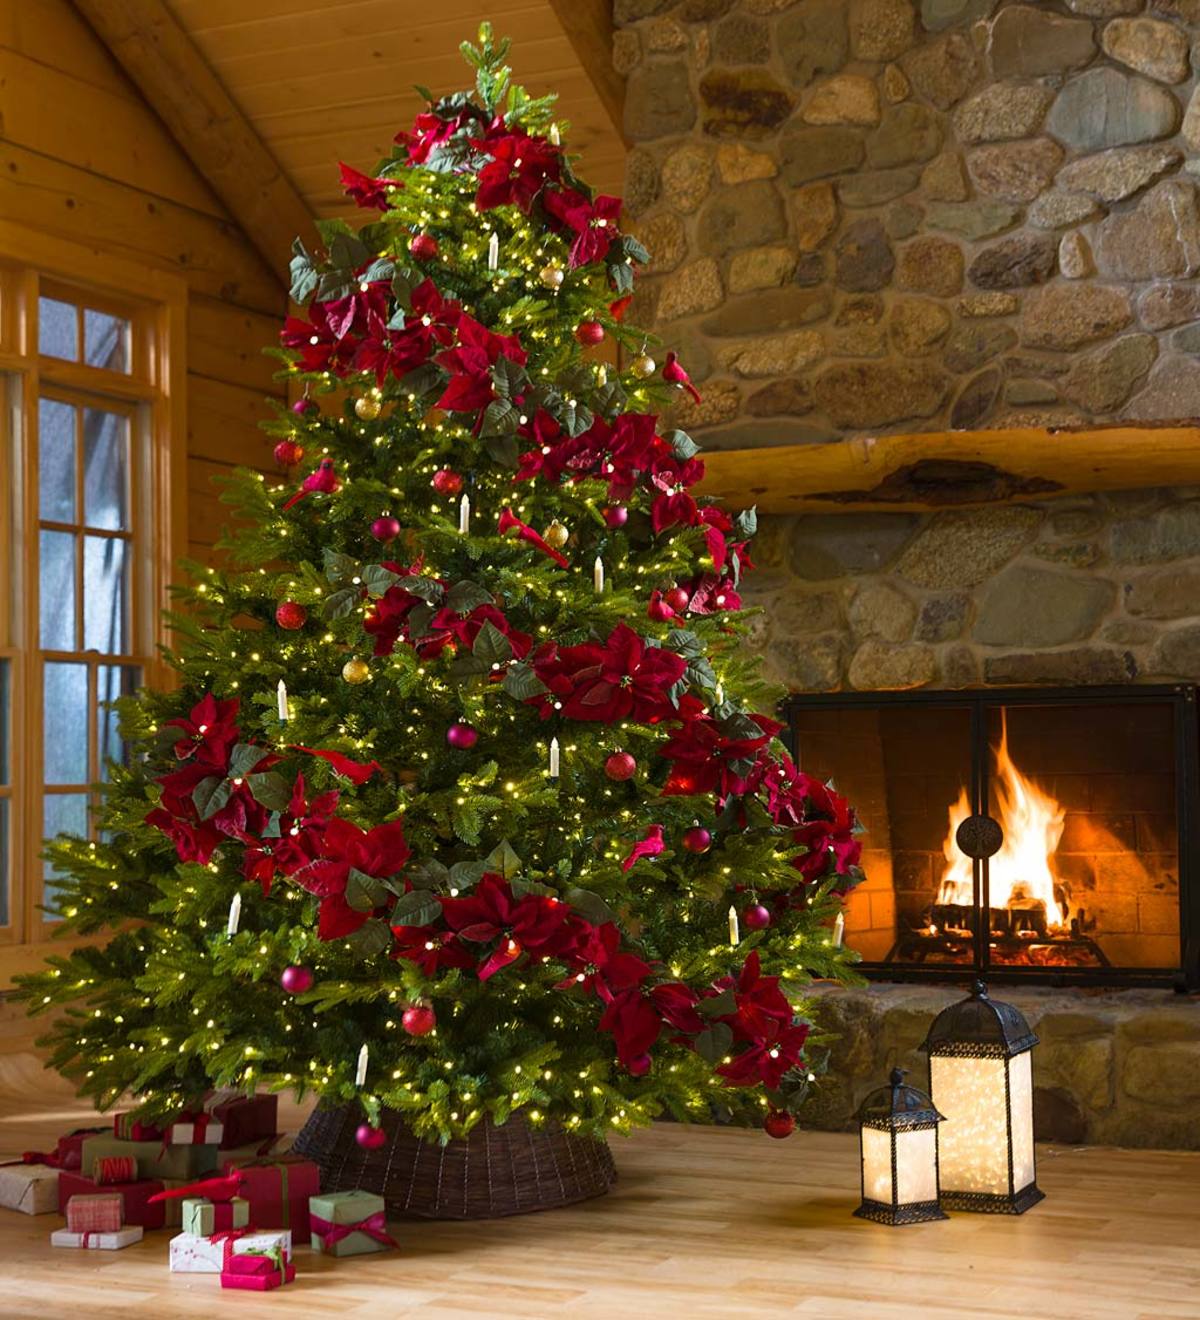 Christmas decorations become easy with these articles